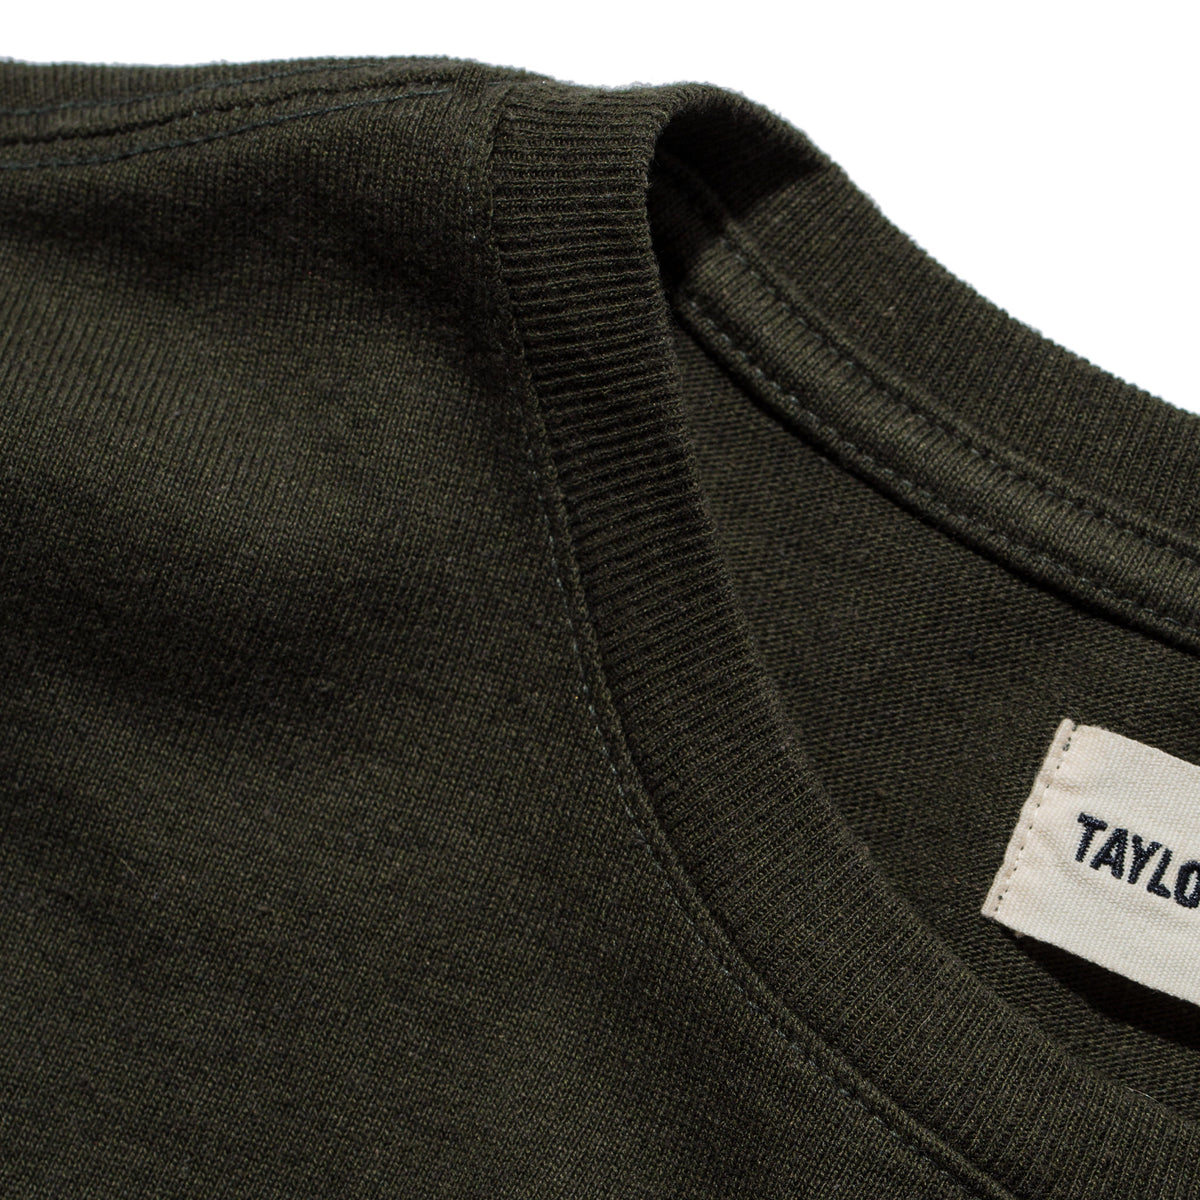 The Heavy Bag Tee in Cypress | Taylor Stitch - Classic Men’s Clothing